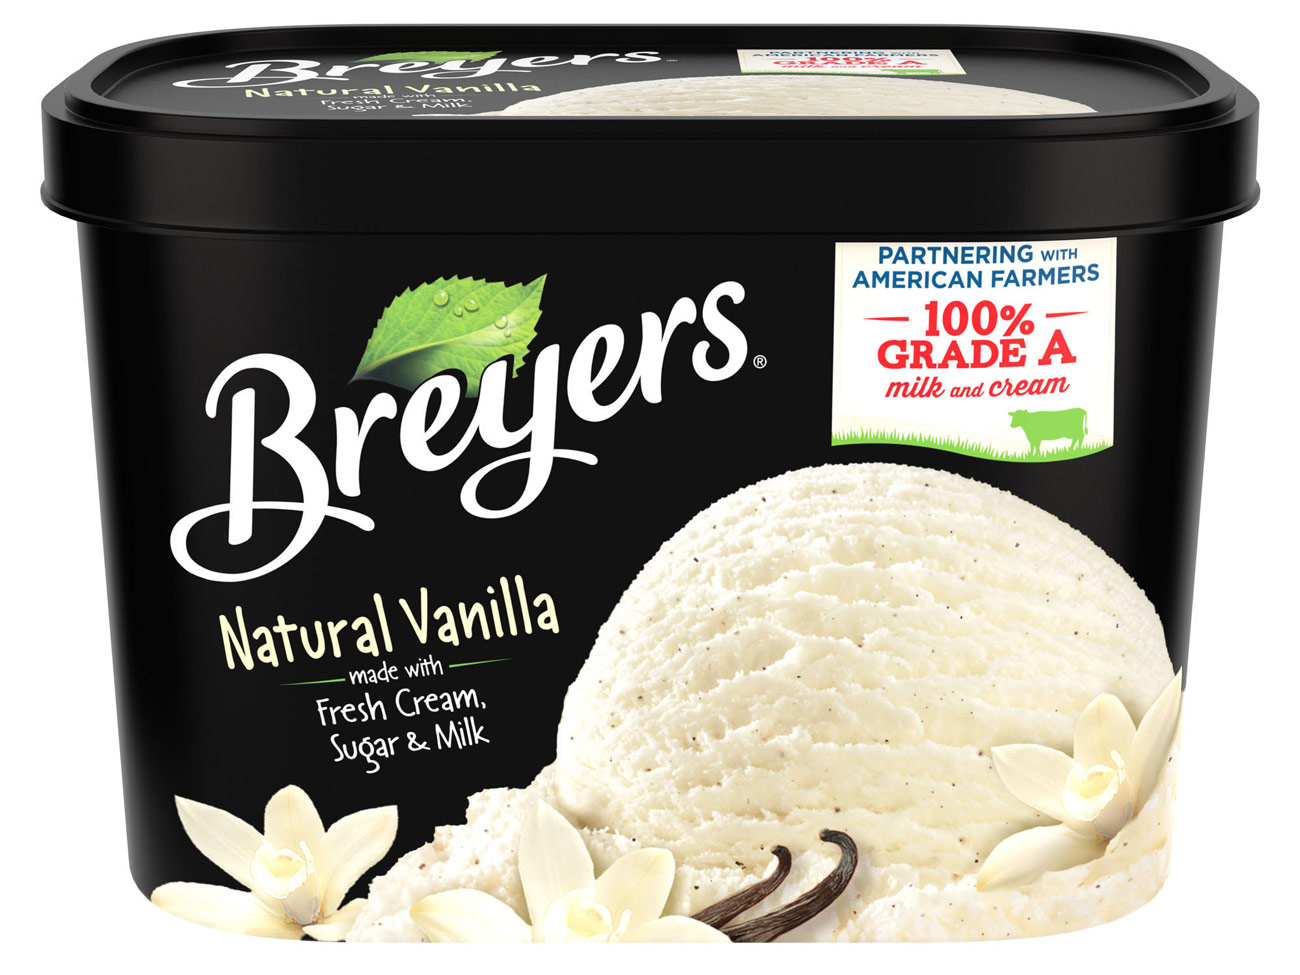 Unilever Shrinks Its Products Again: Breyers Ice Cream Now 25